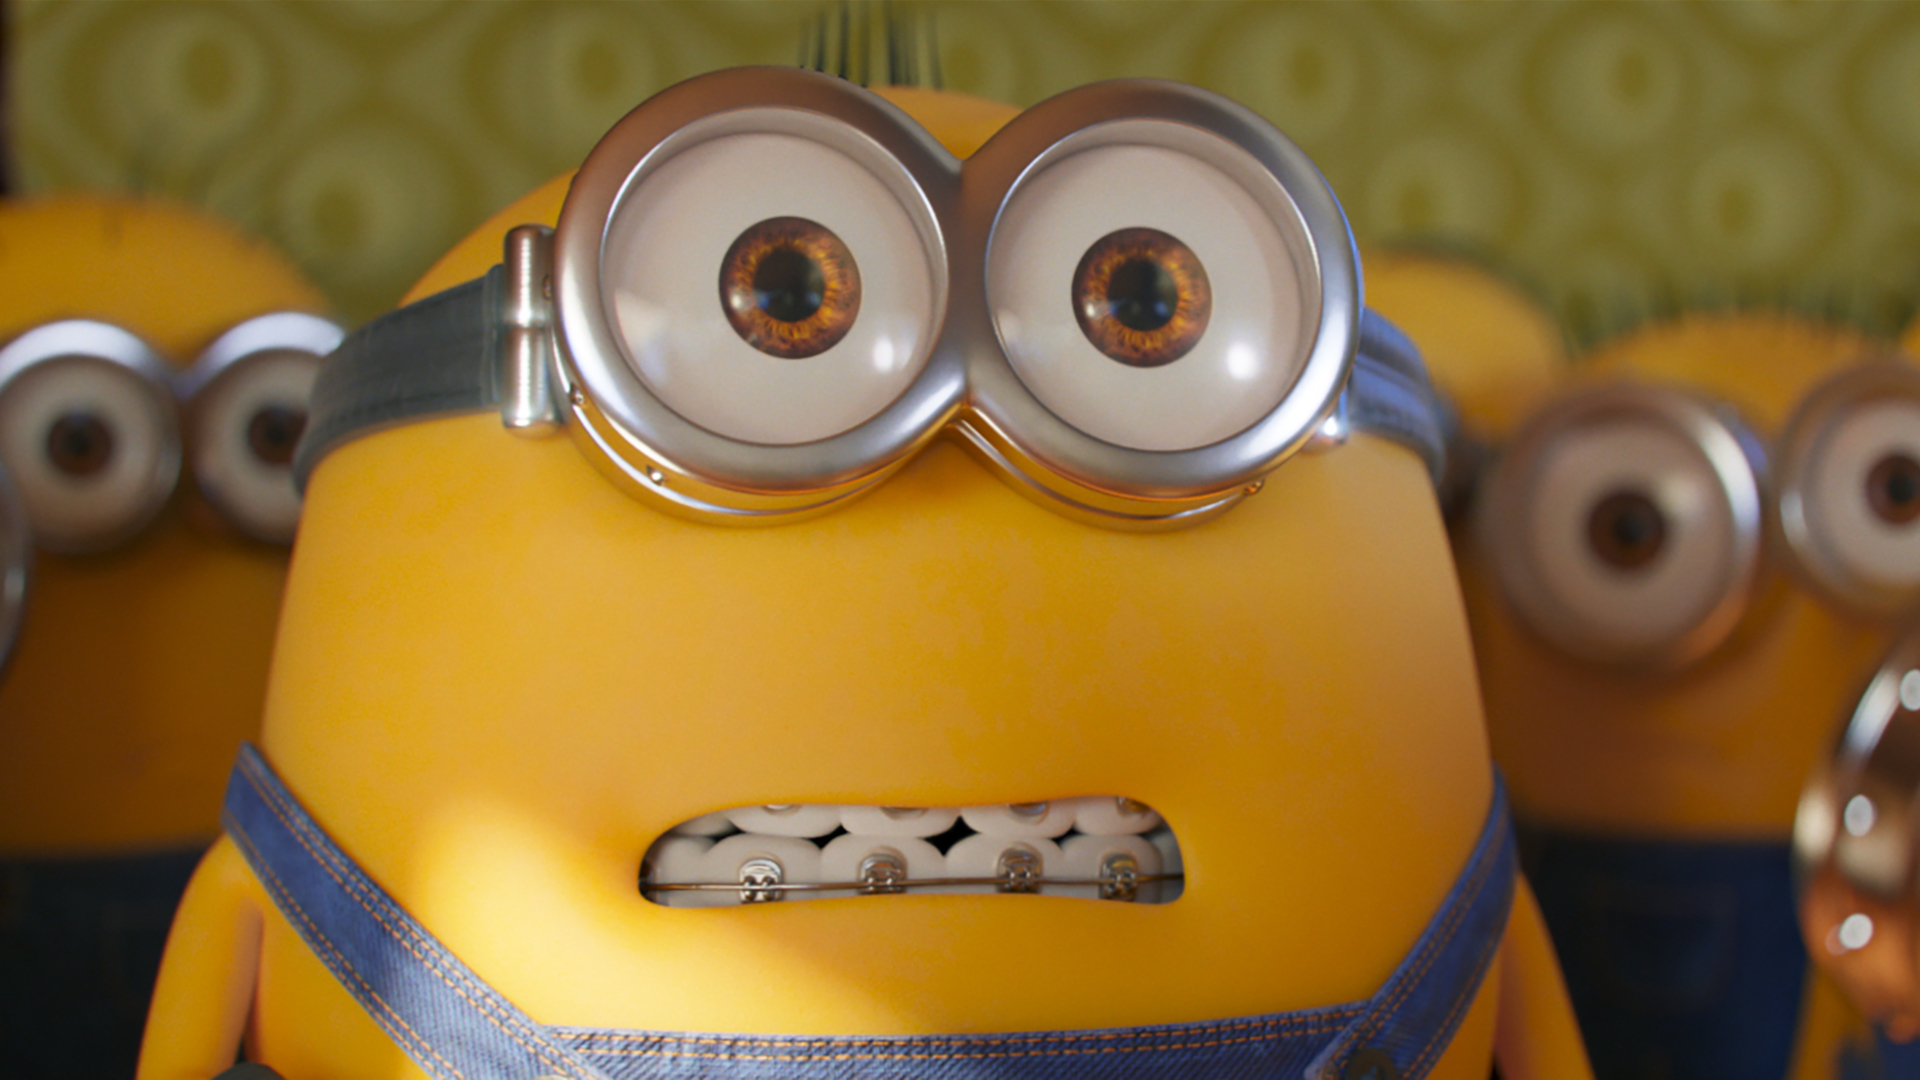 Movie Minions: The Rise of Gru HD Wallpaper | Background Image